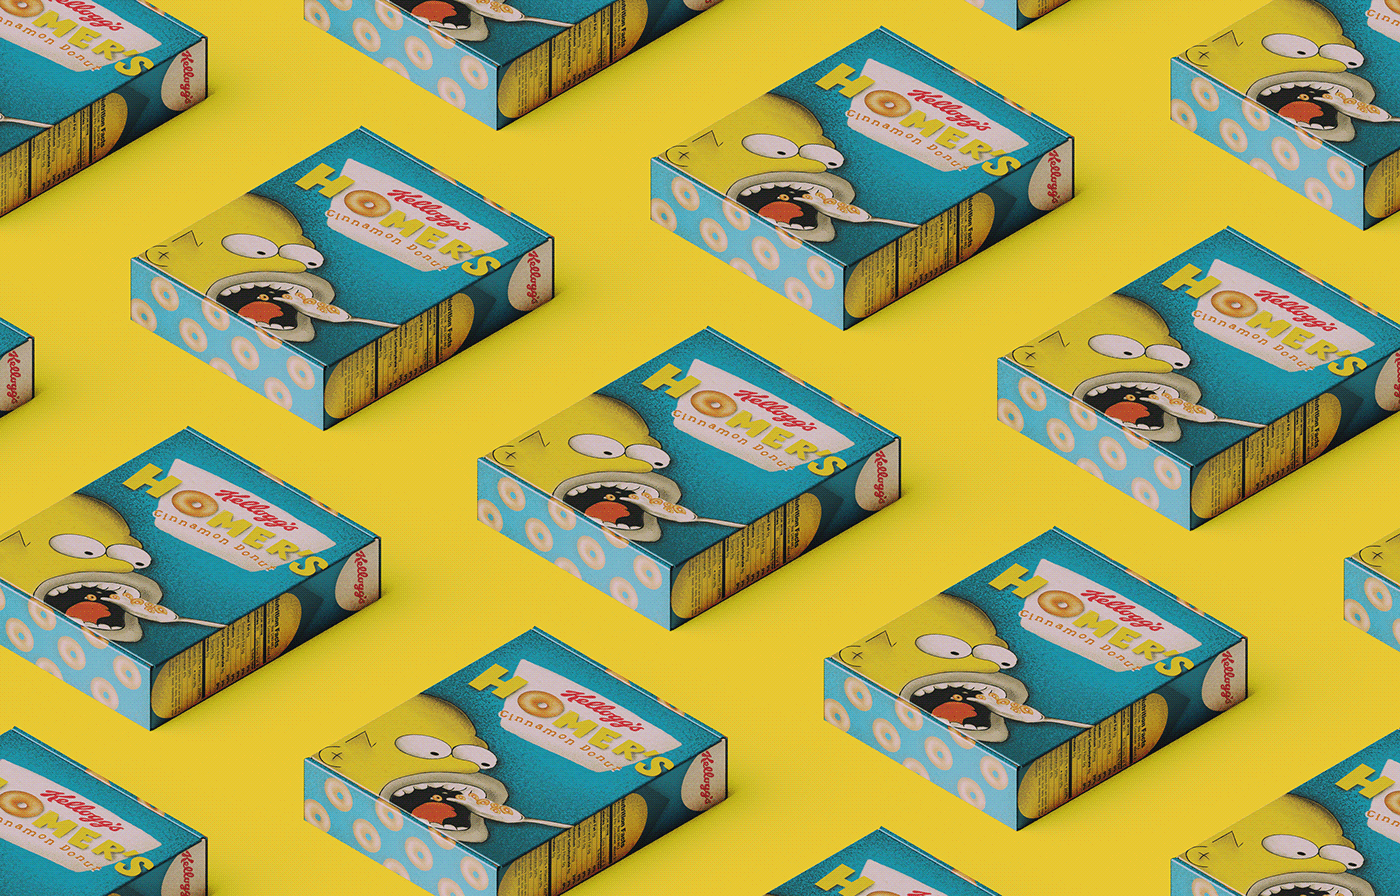 #Cereal Box Design #the simpsons breakfast cereal box mockup graphic design  Kellogg's product design 